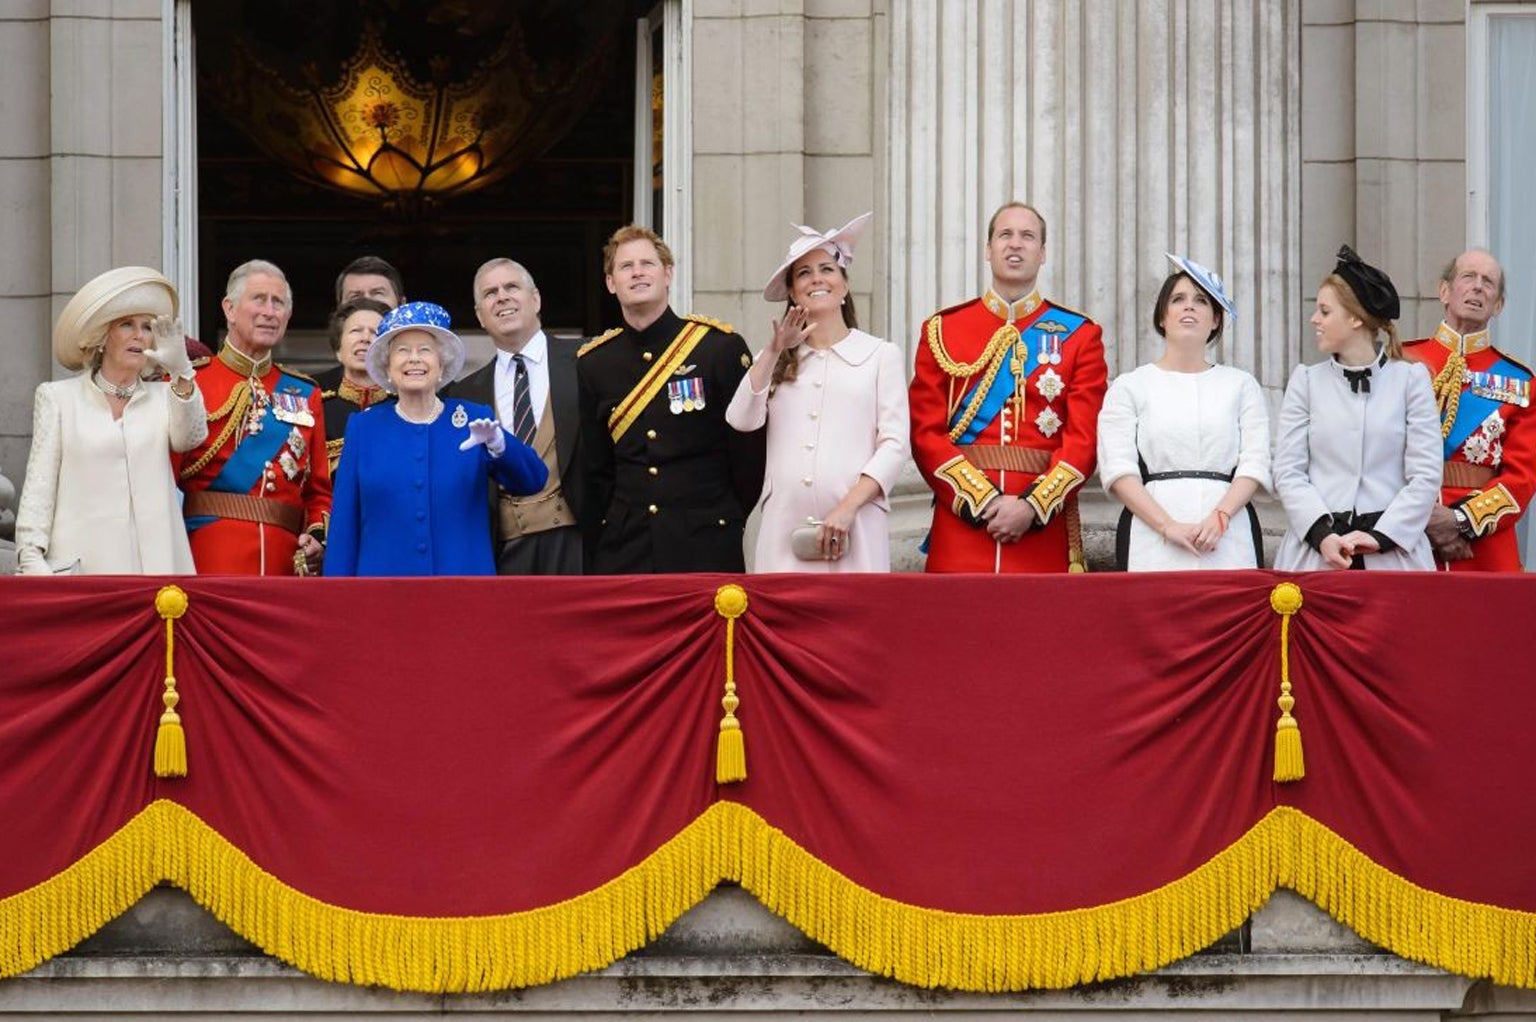 Left to right: The Duchess of Cornwall, the Prince of Wales, the Princess Royal, Queen Elizabeth II, the Duke of York, Prince Harry, the Duke and Duchess of Cambridge, Princess Eugenie, Princess Beatrice and the Duke of Kent, on the balcony of Buckingham Palace